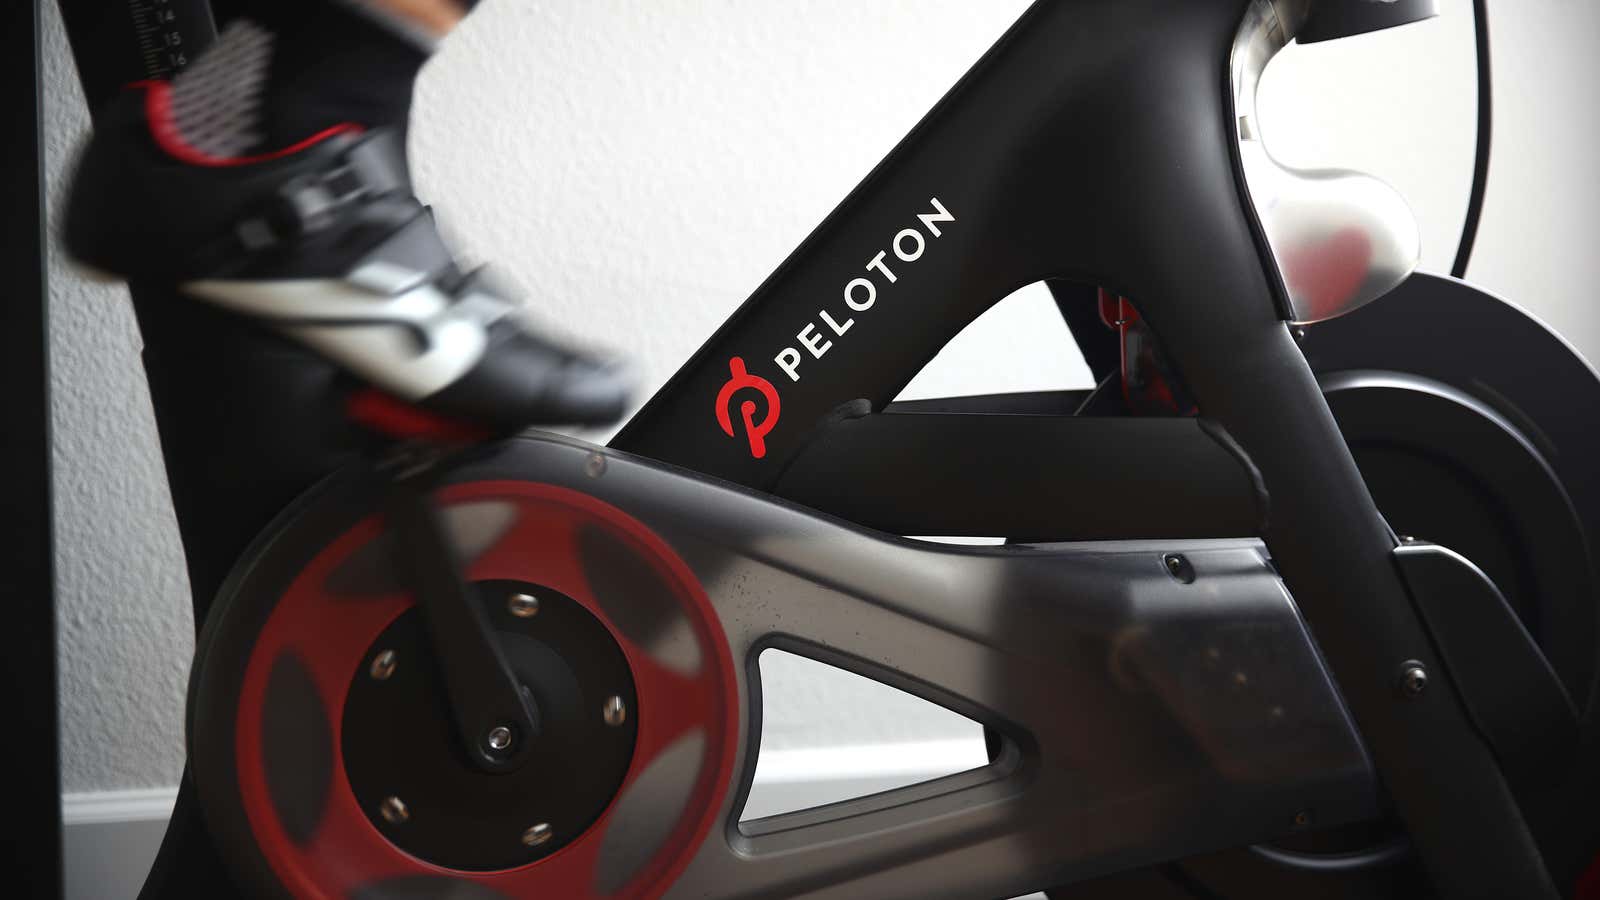 Peloton is trying to be everything, everywhere, all at once